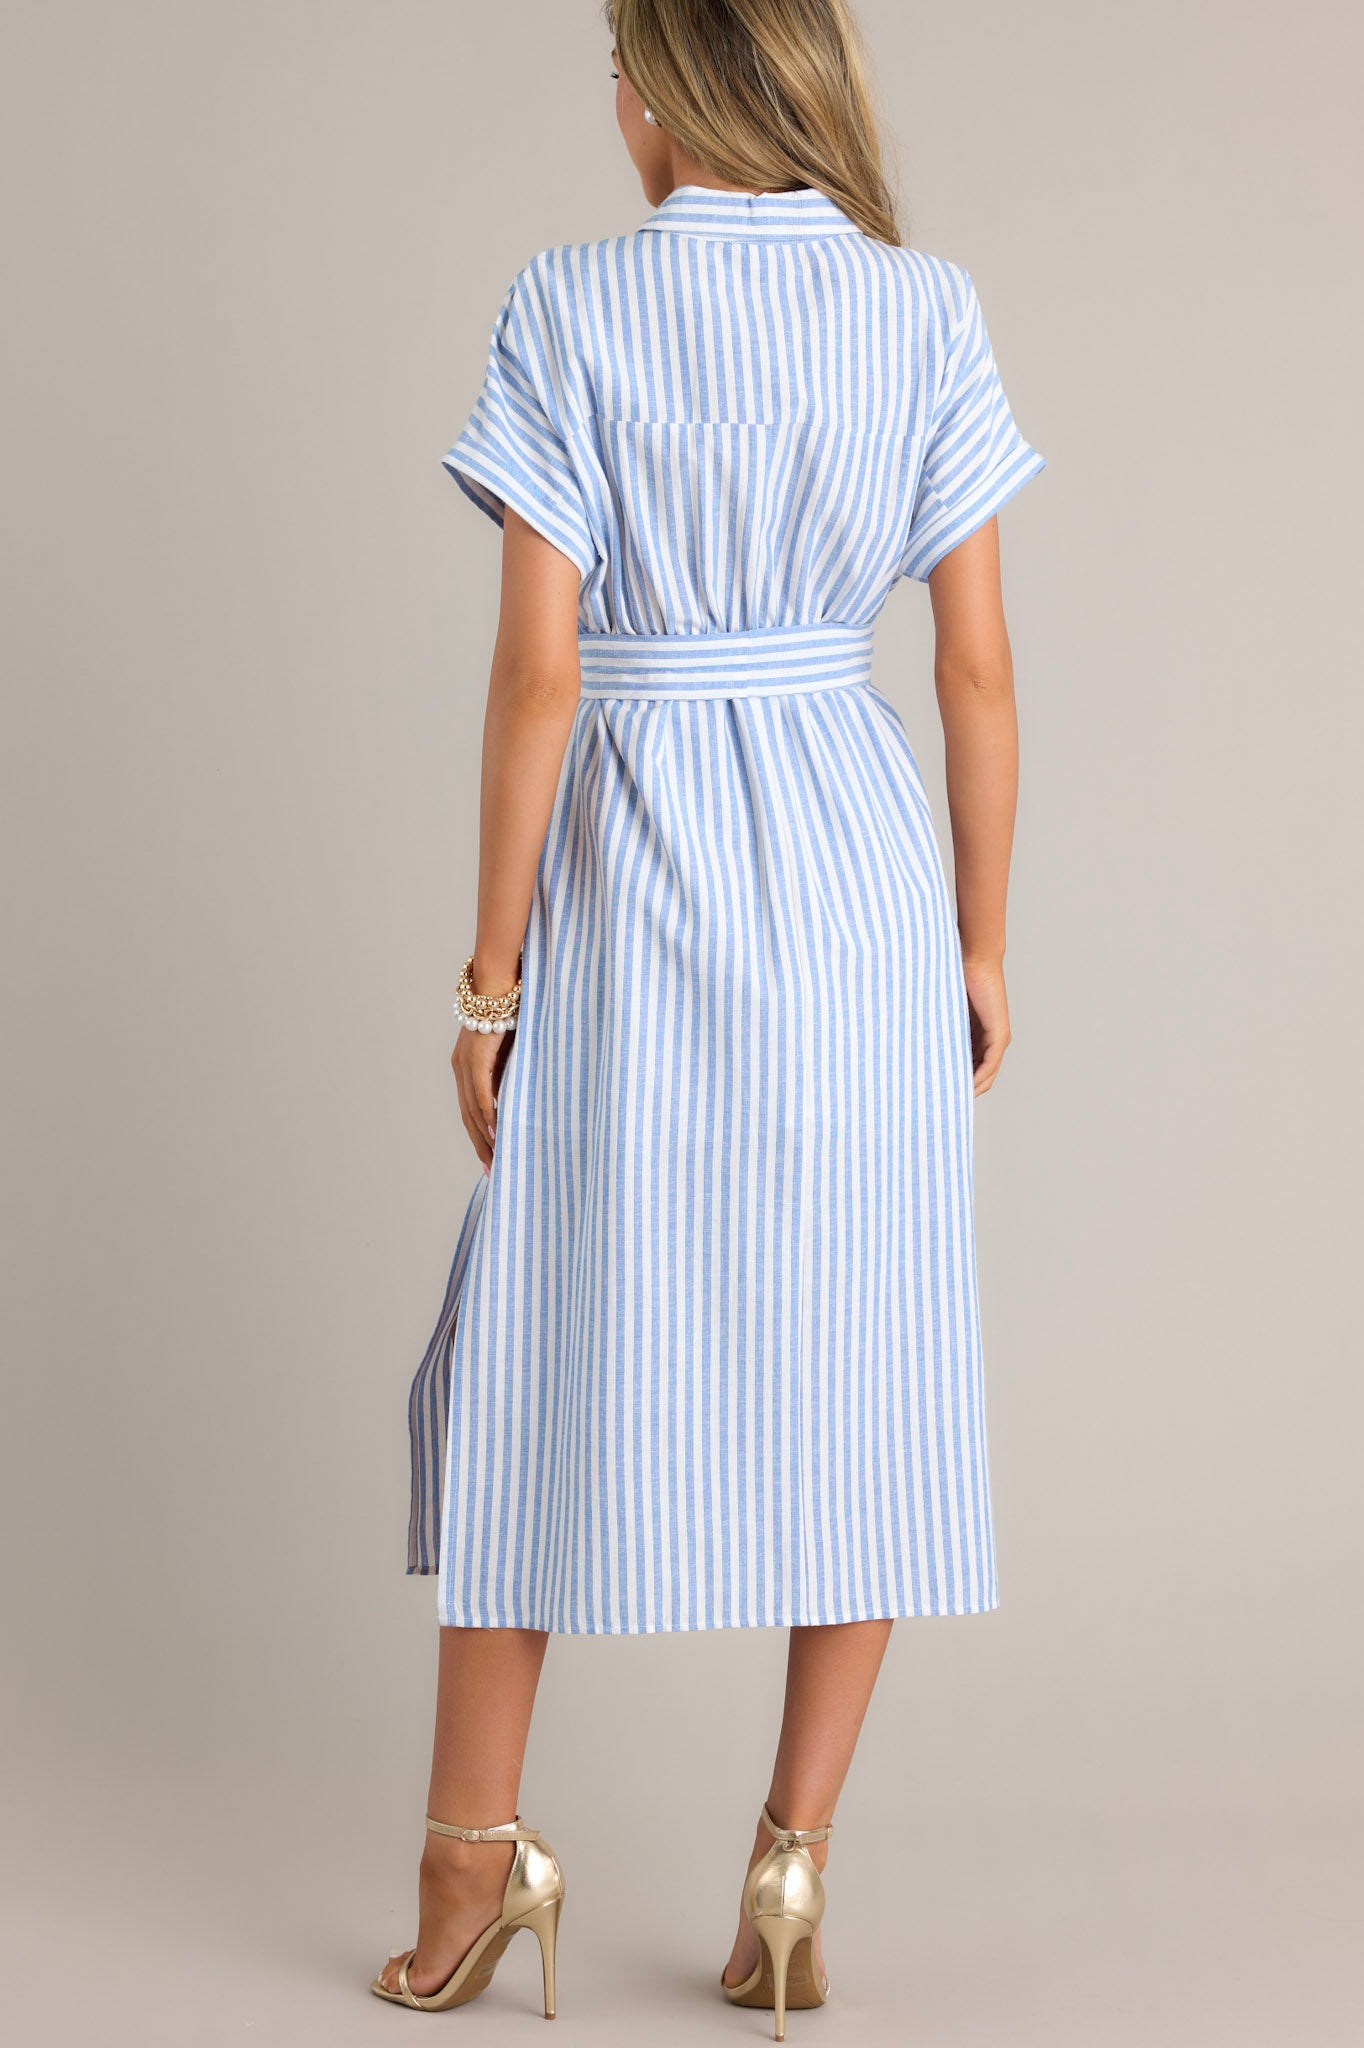 Back view of this dress that features a collared neckline, a full button front, a fitted waist, a self-tie waist belt, functional pockets, two side slits, and folded short sleeves.